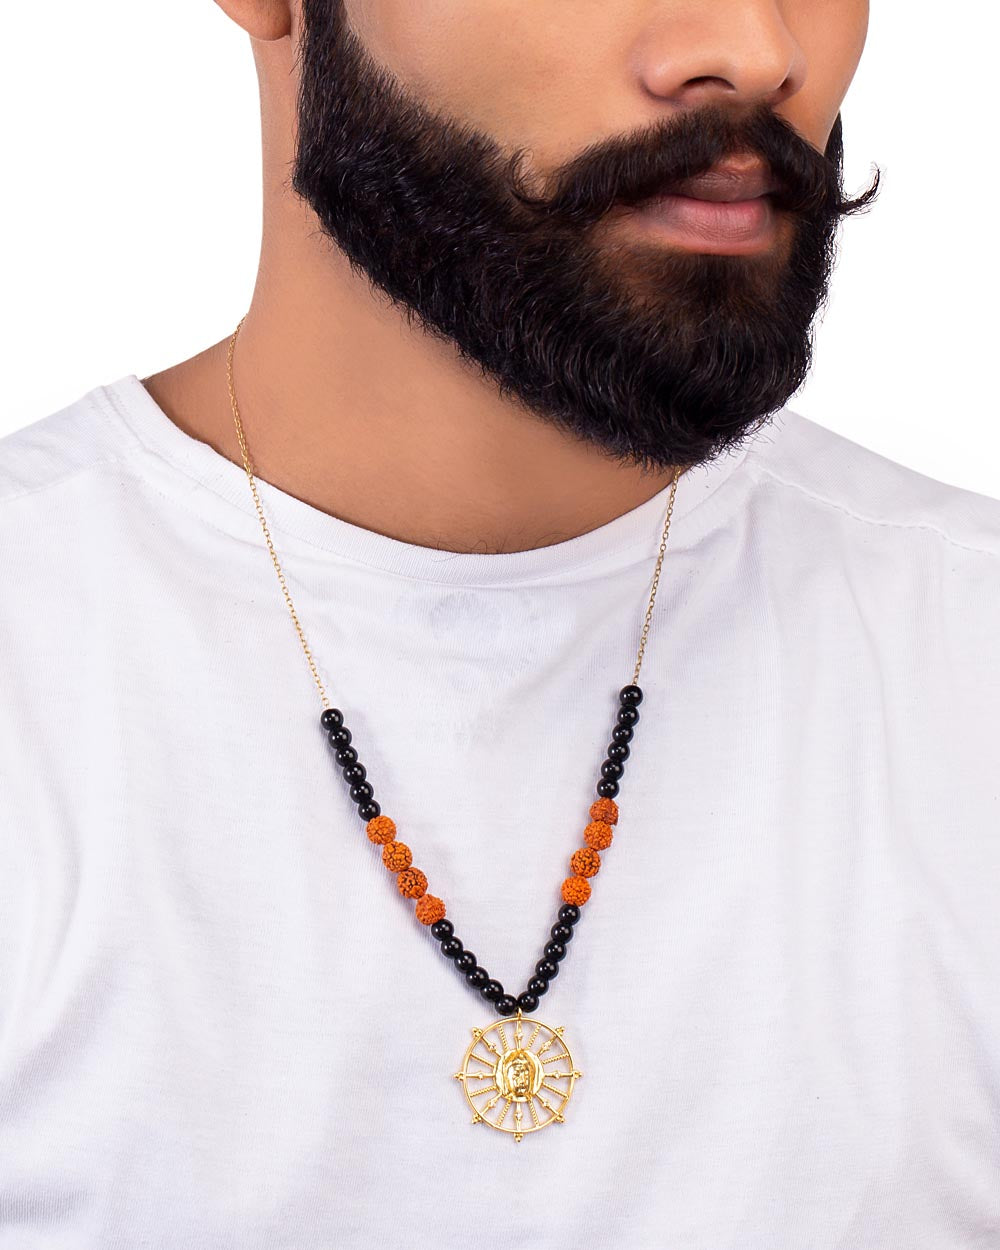 Lord Buddha Inscribed In A Chakra Designer Pendant With Rudraksha & Black Beaded Chain For Men